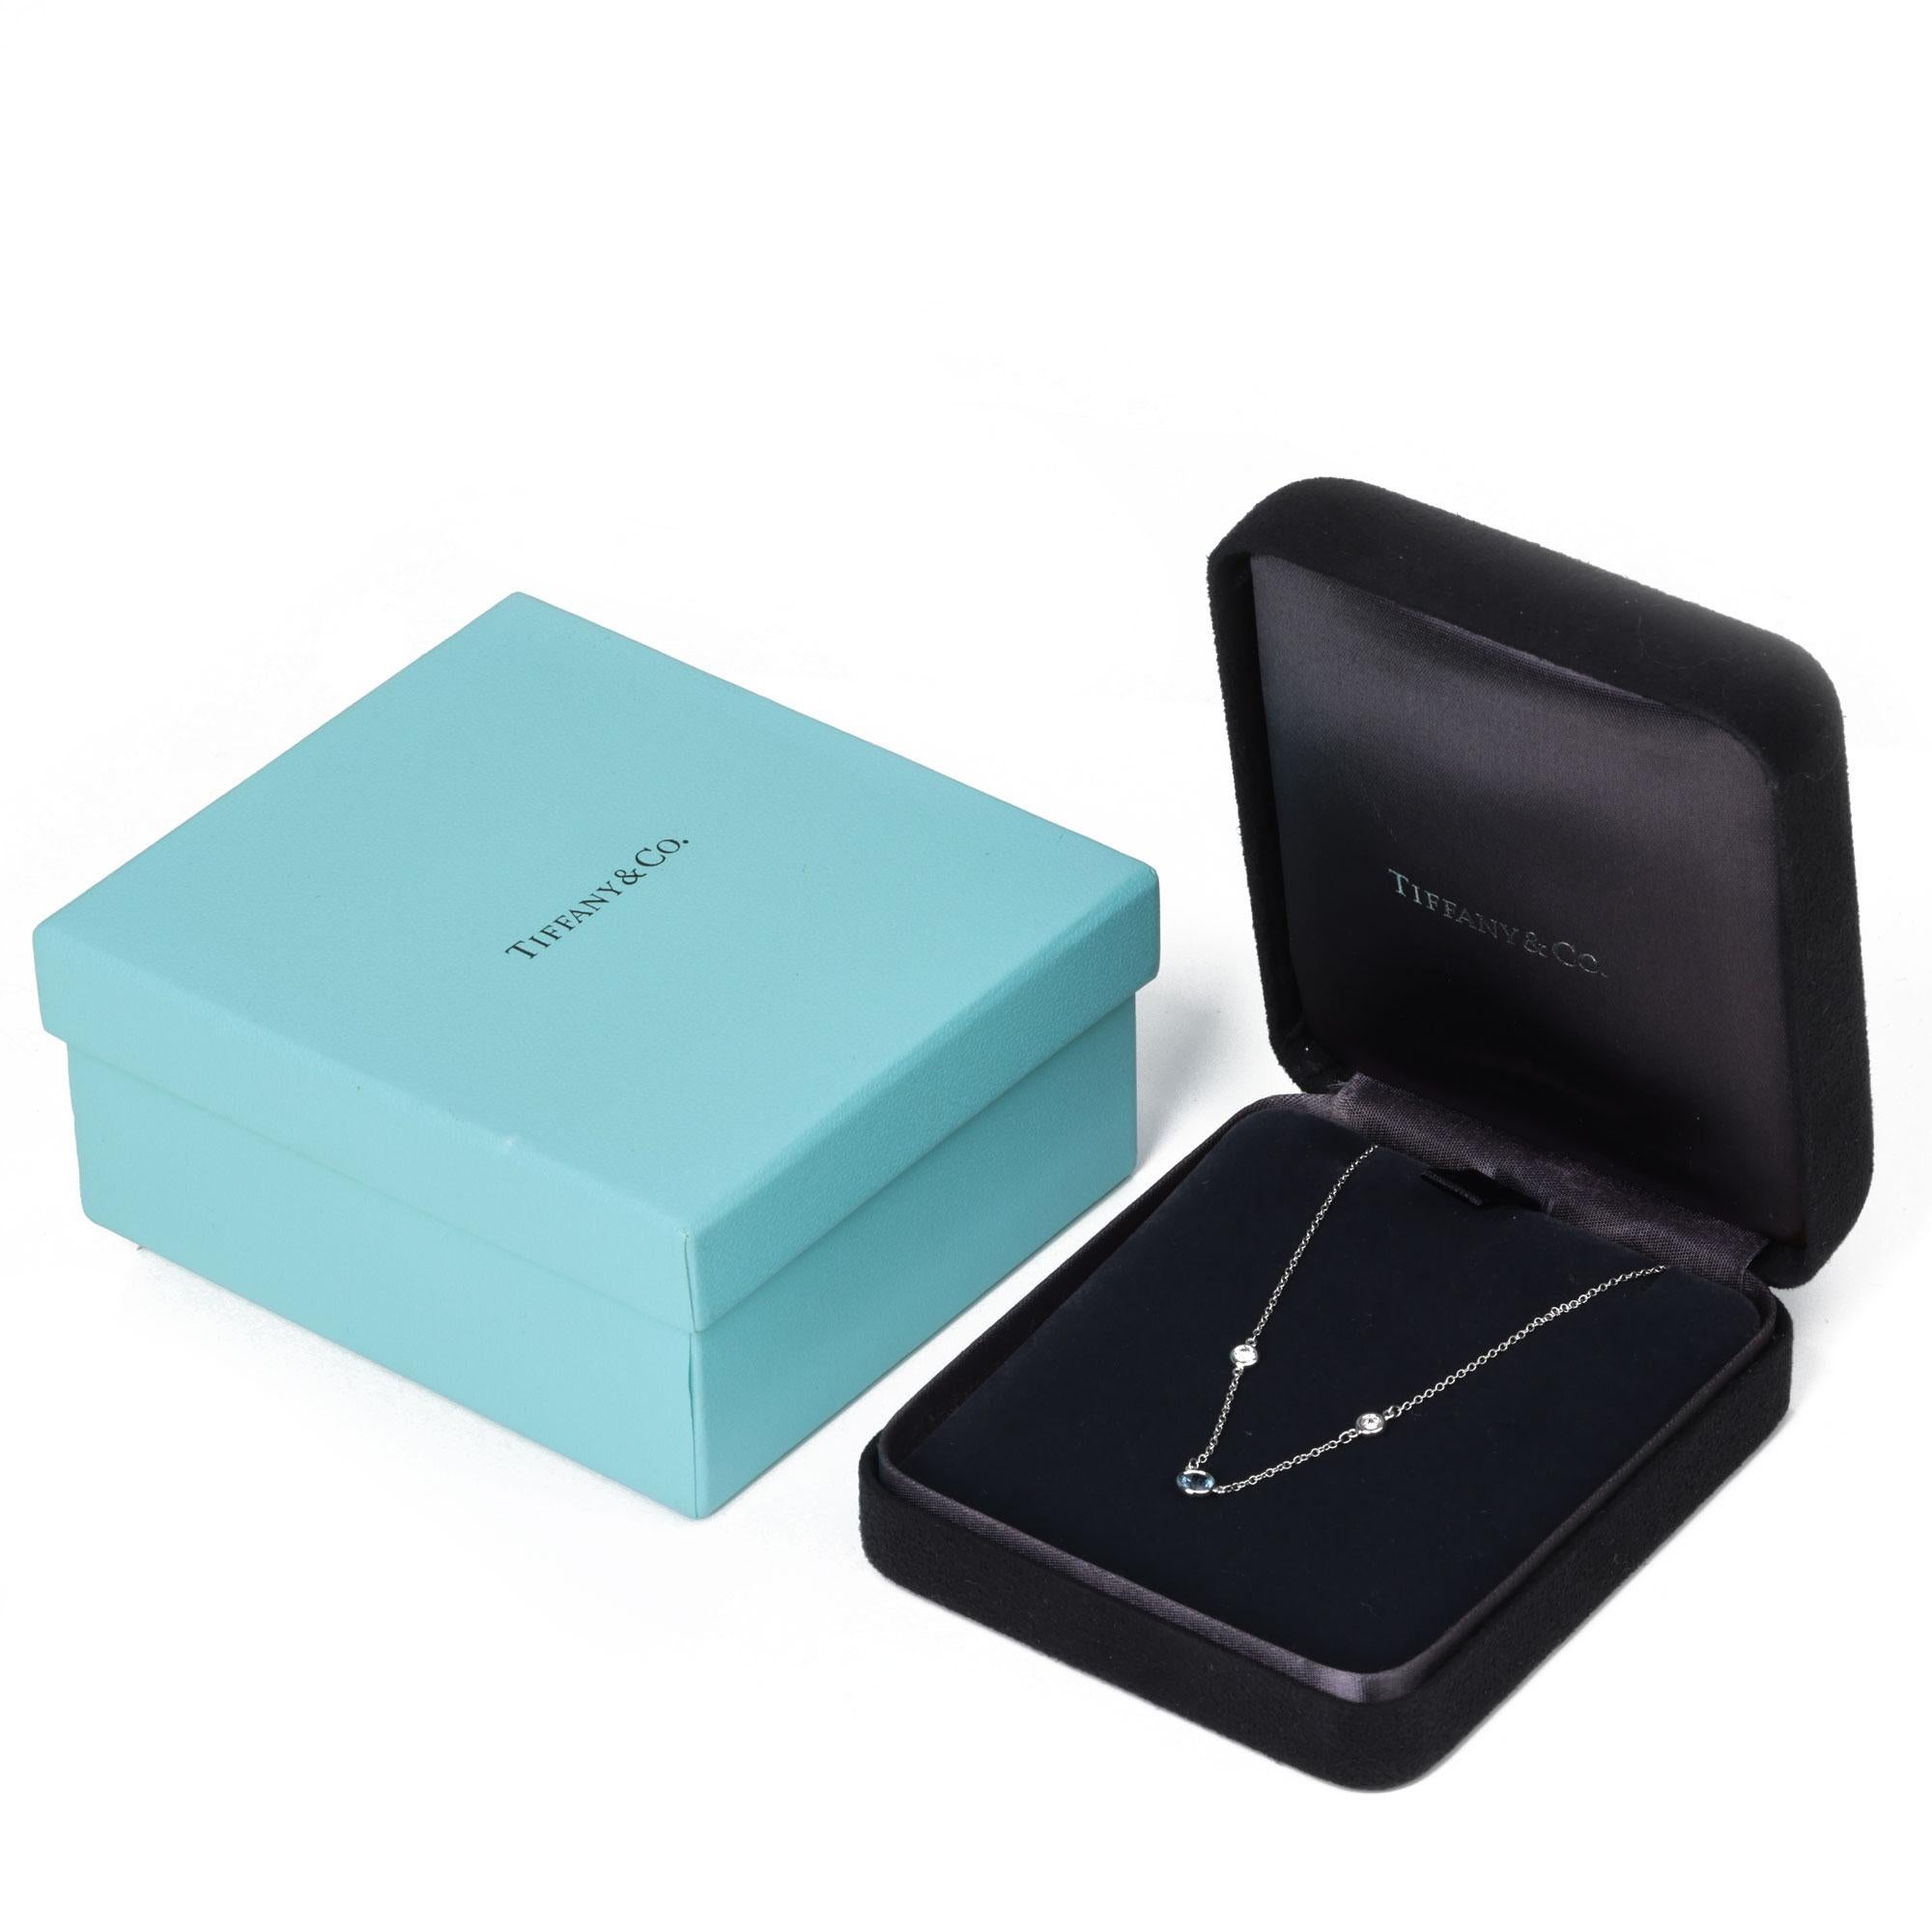 This necklace by Tiffany & Co. is from their Elsa Peretti Colours by the Yard collection, it features two round brilliant cut diamonds and one Aquamarine set in a Platinum chain. Accompanied with a Tiffany box.

Details
J845
Tiffany & Co.
Elsa